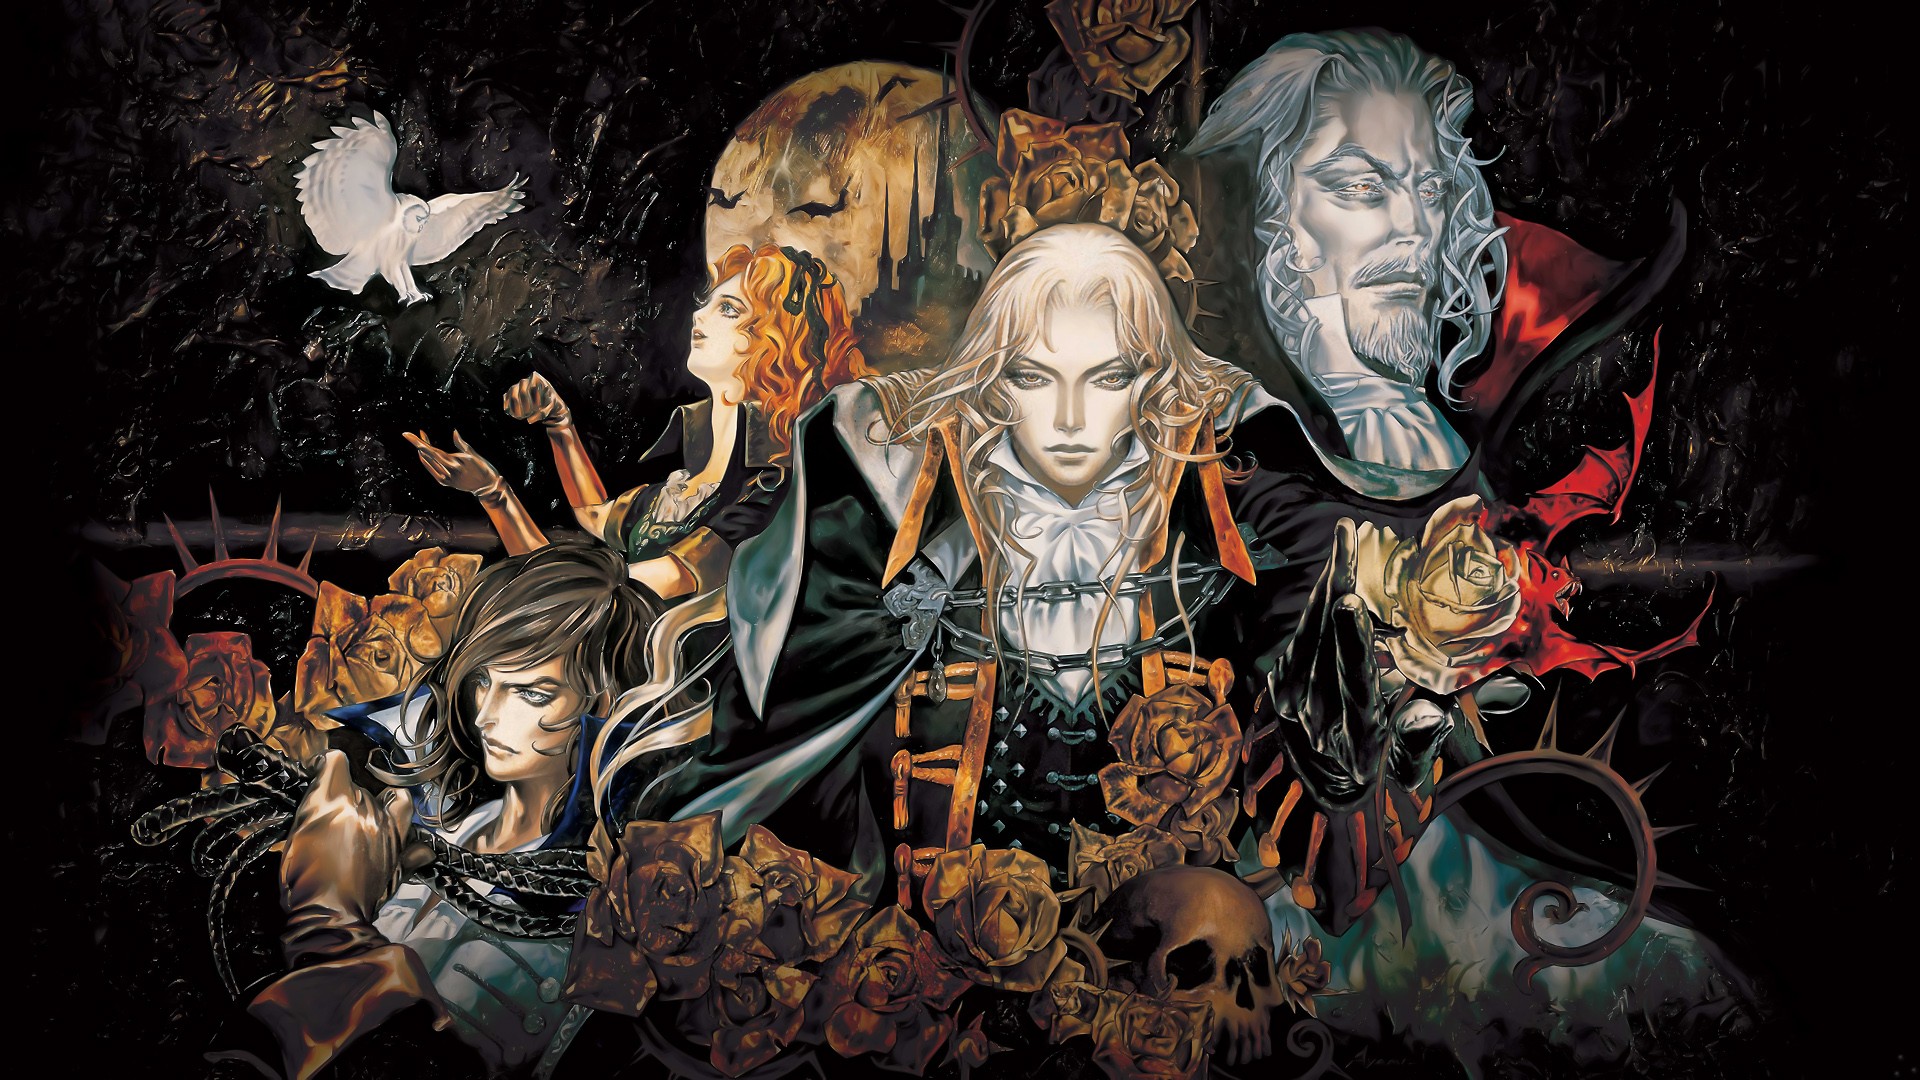 Dark and gothic Castlevania artwork by Ayami Kojima, perfect for a video game lover's desktop wallpaper.